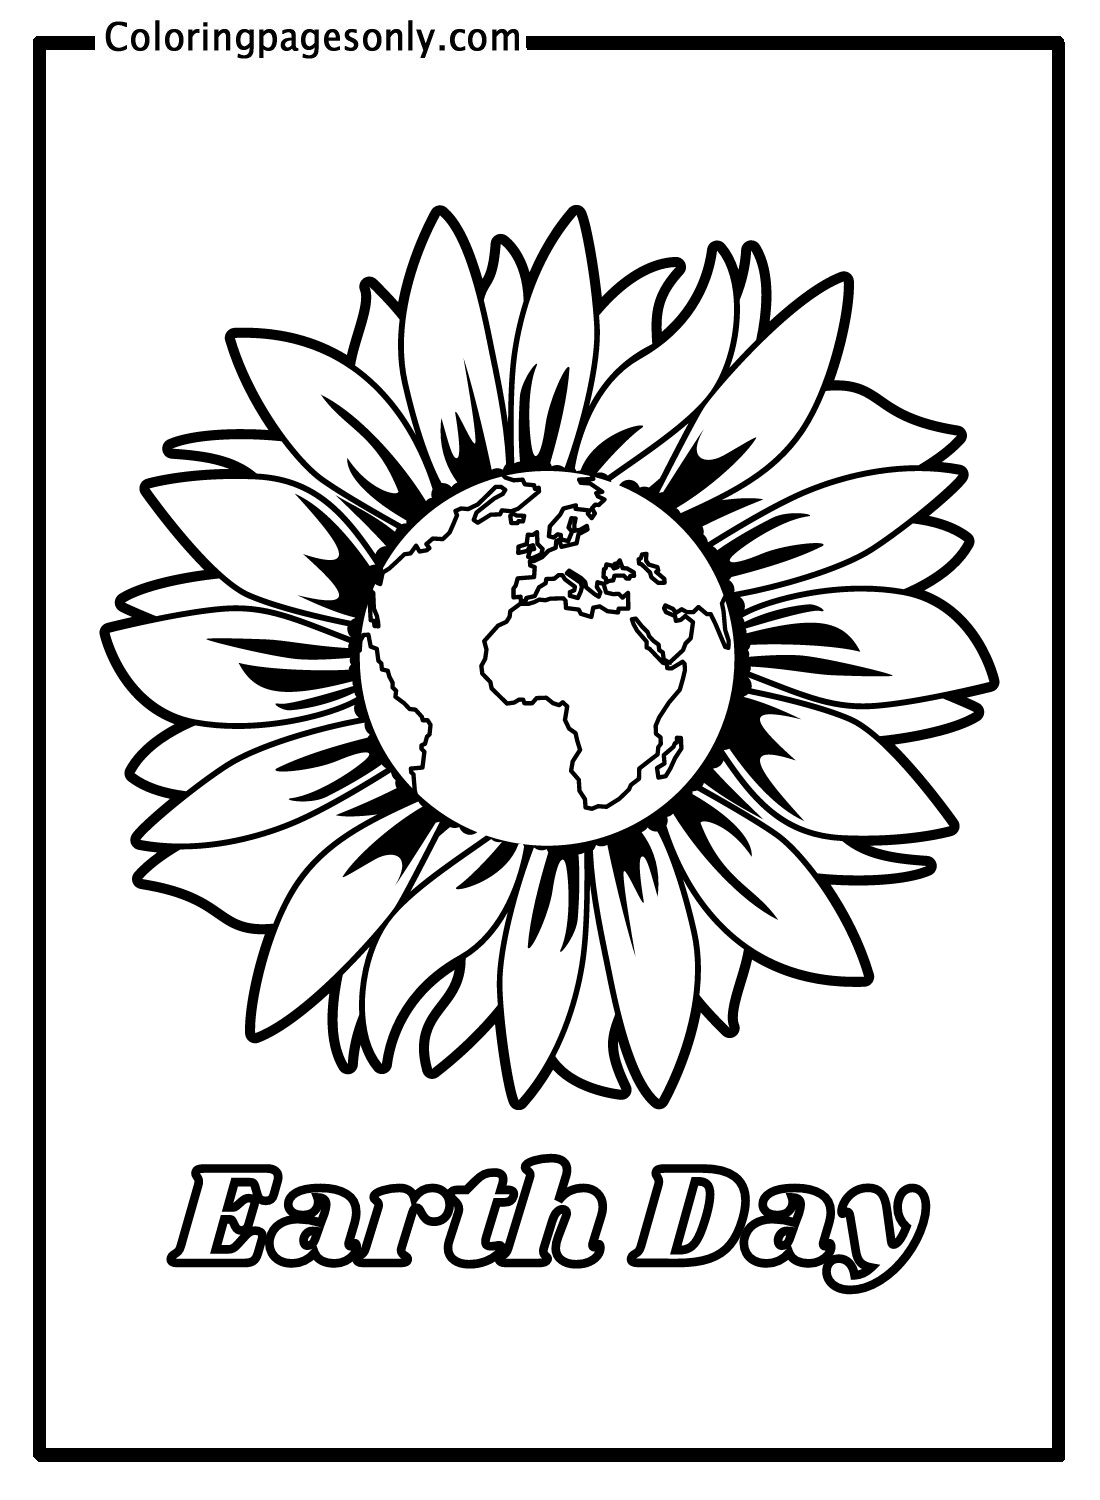 Earth Day To Download Coloring Pages